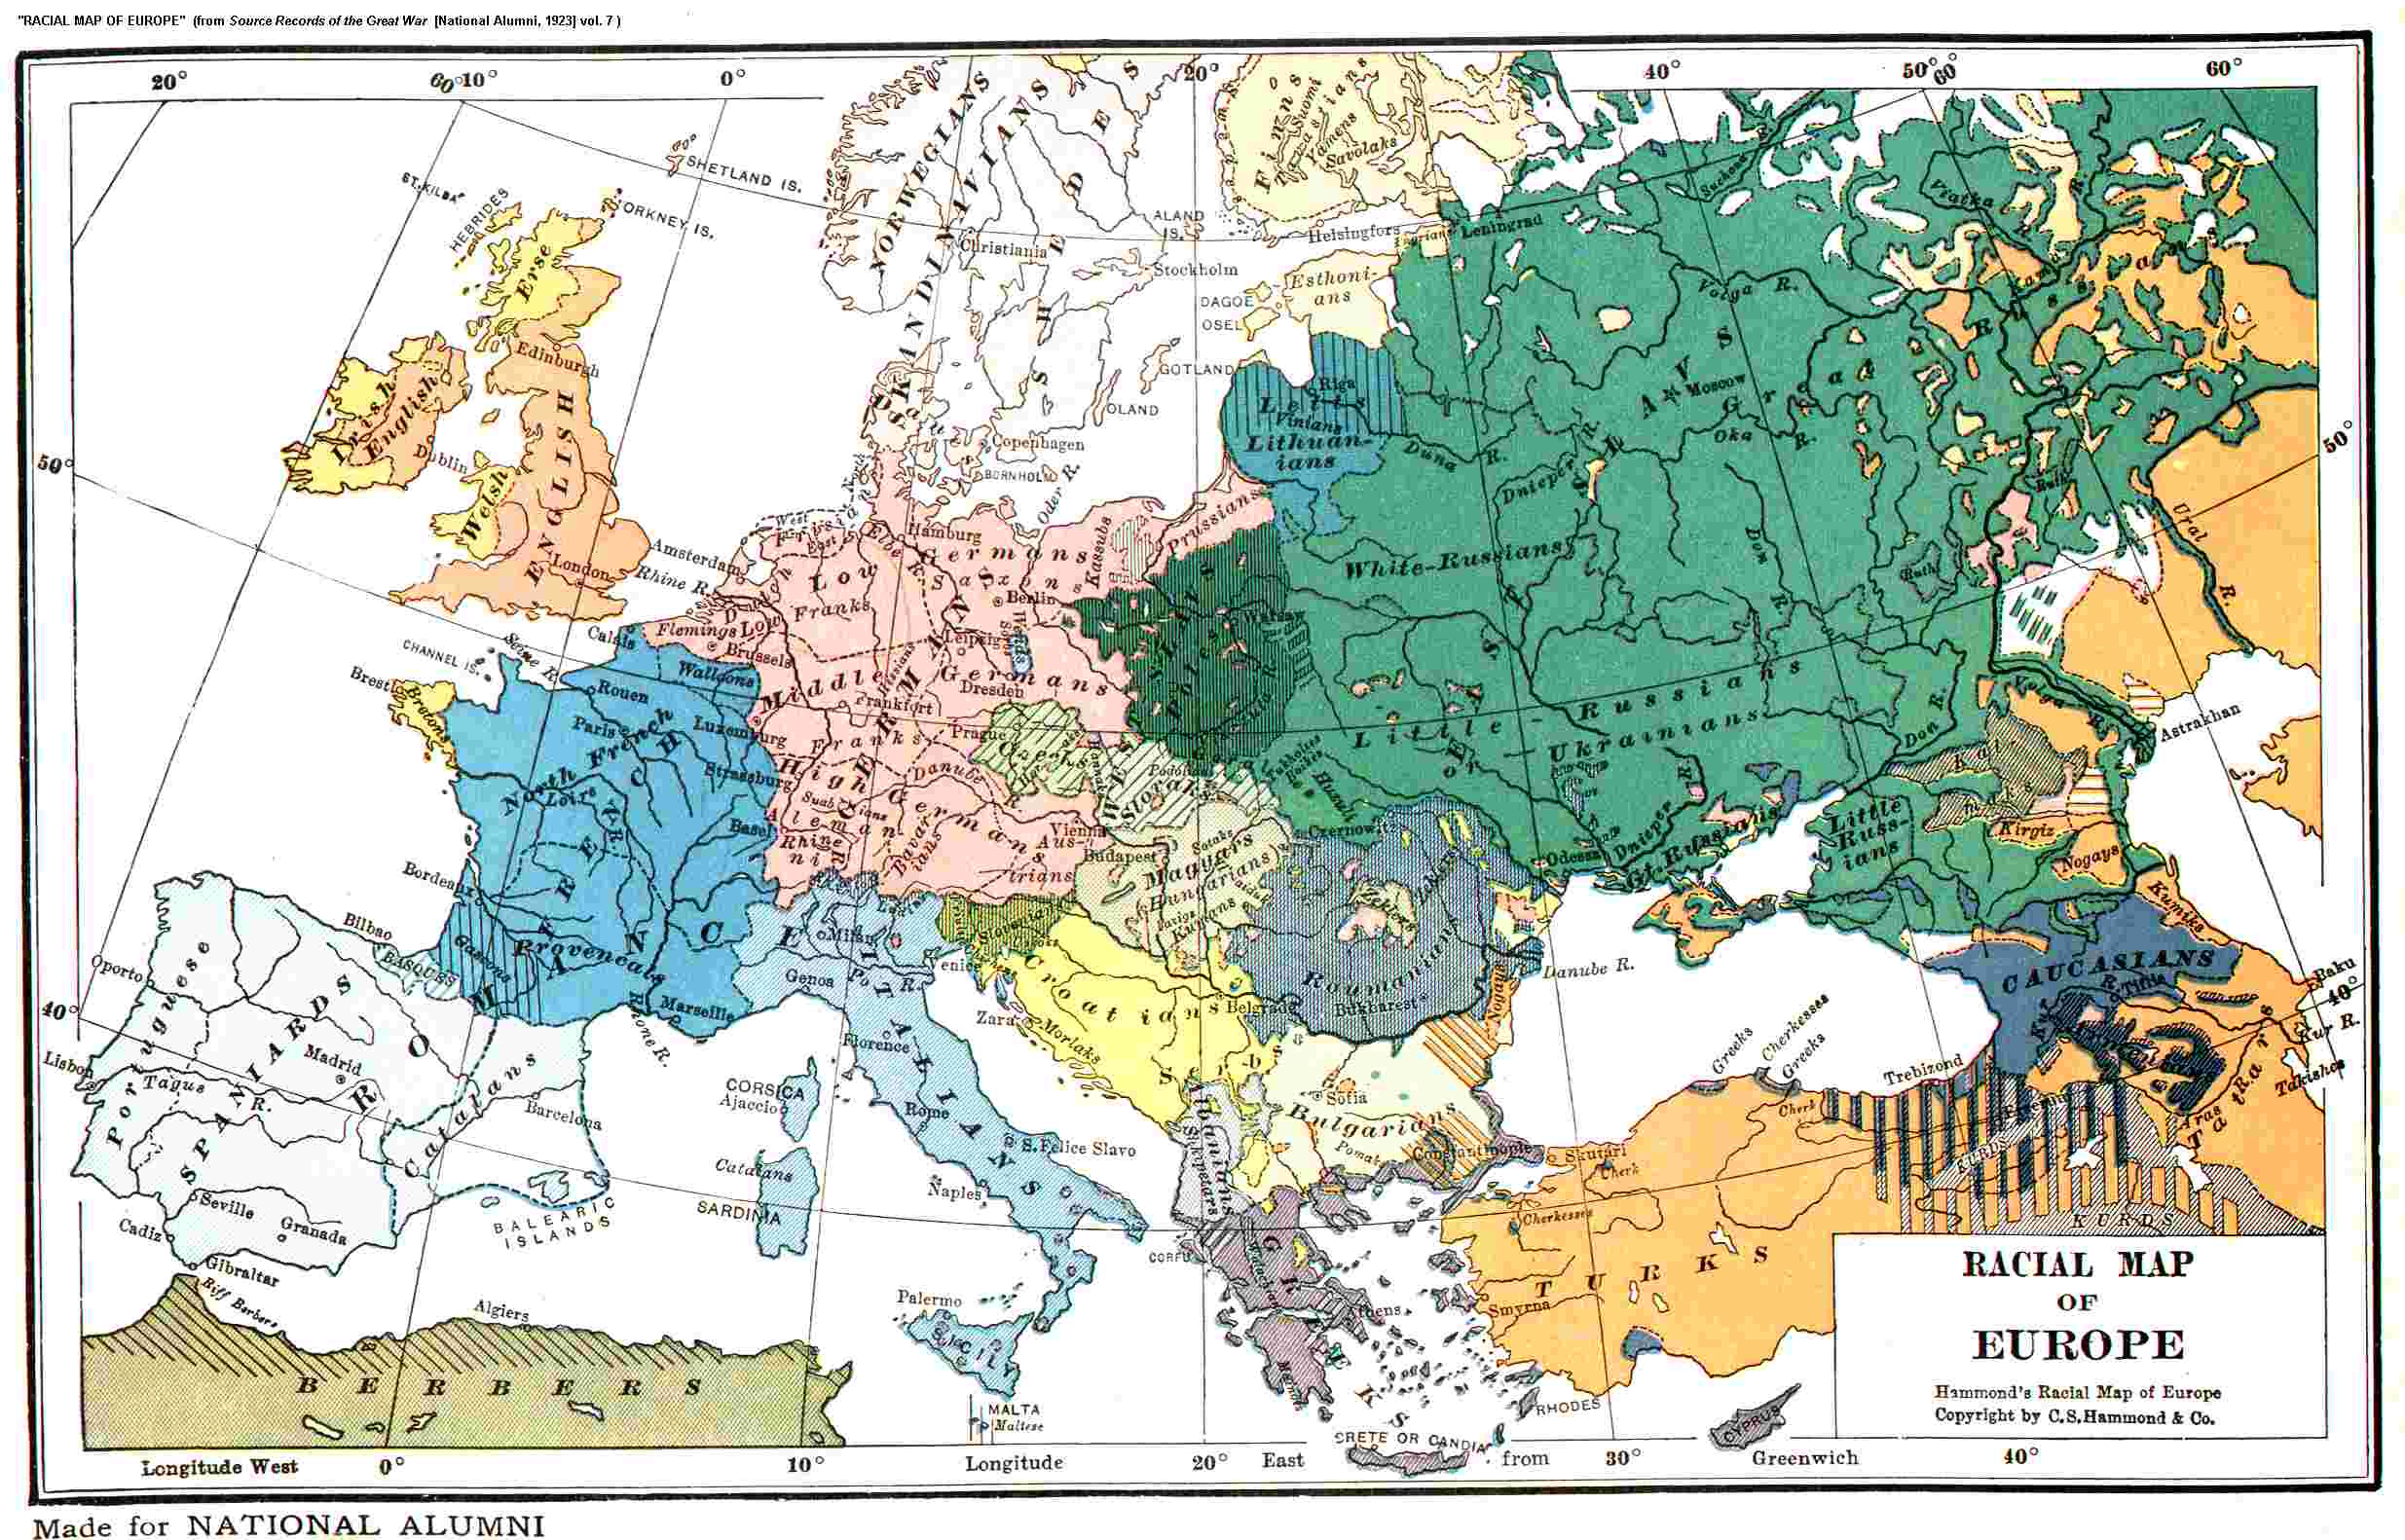 Map Of Europe 1919